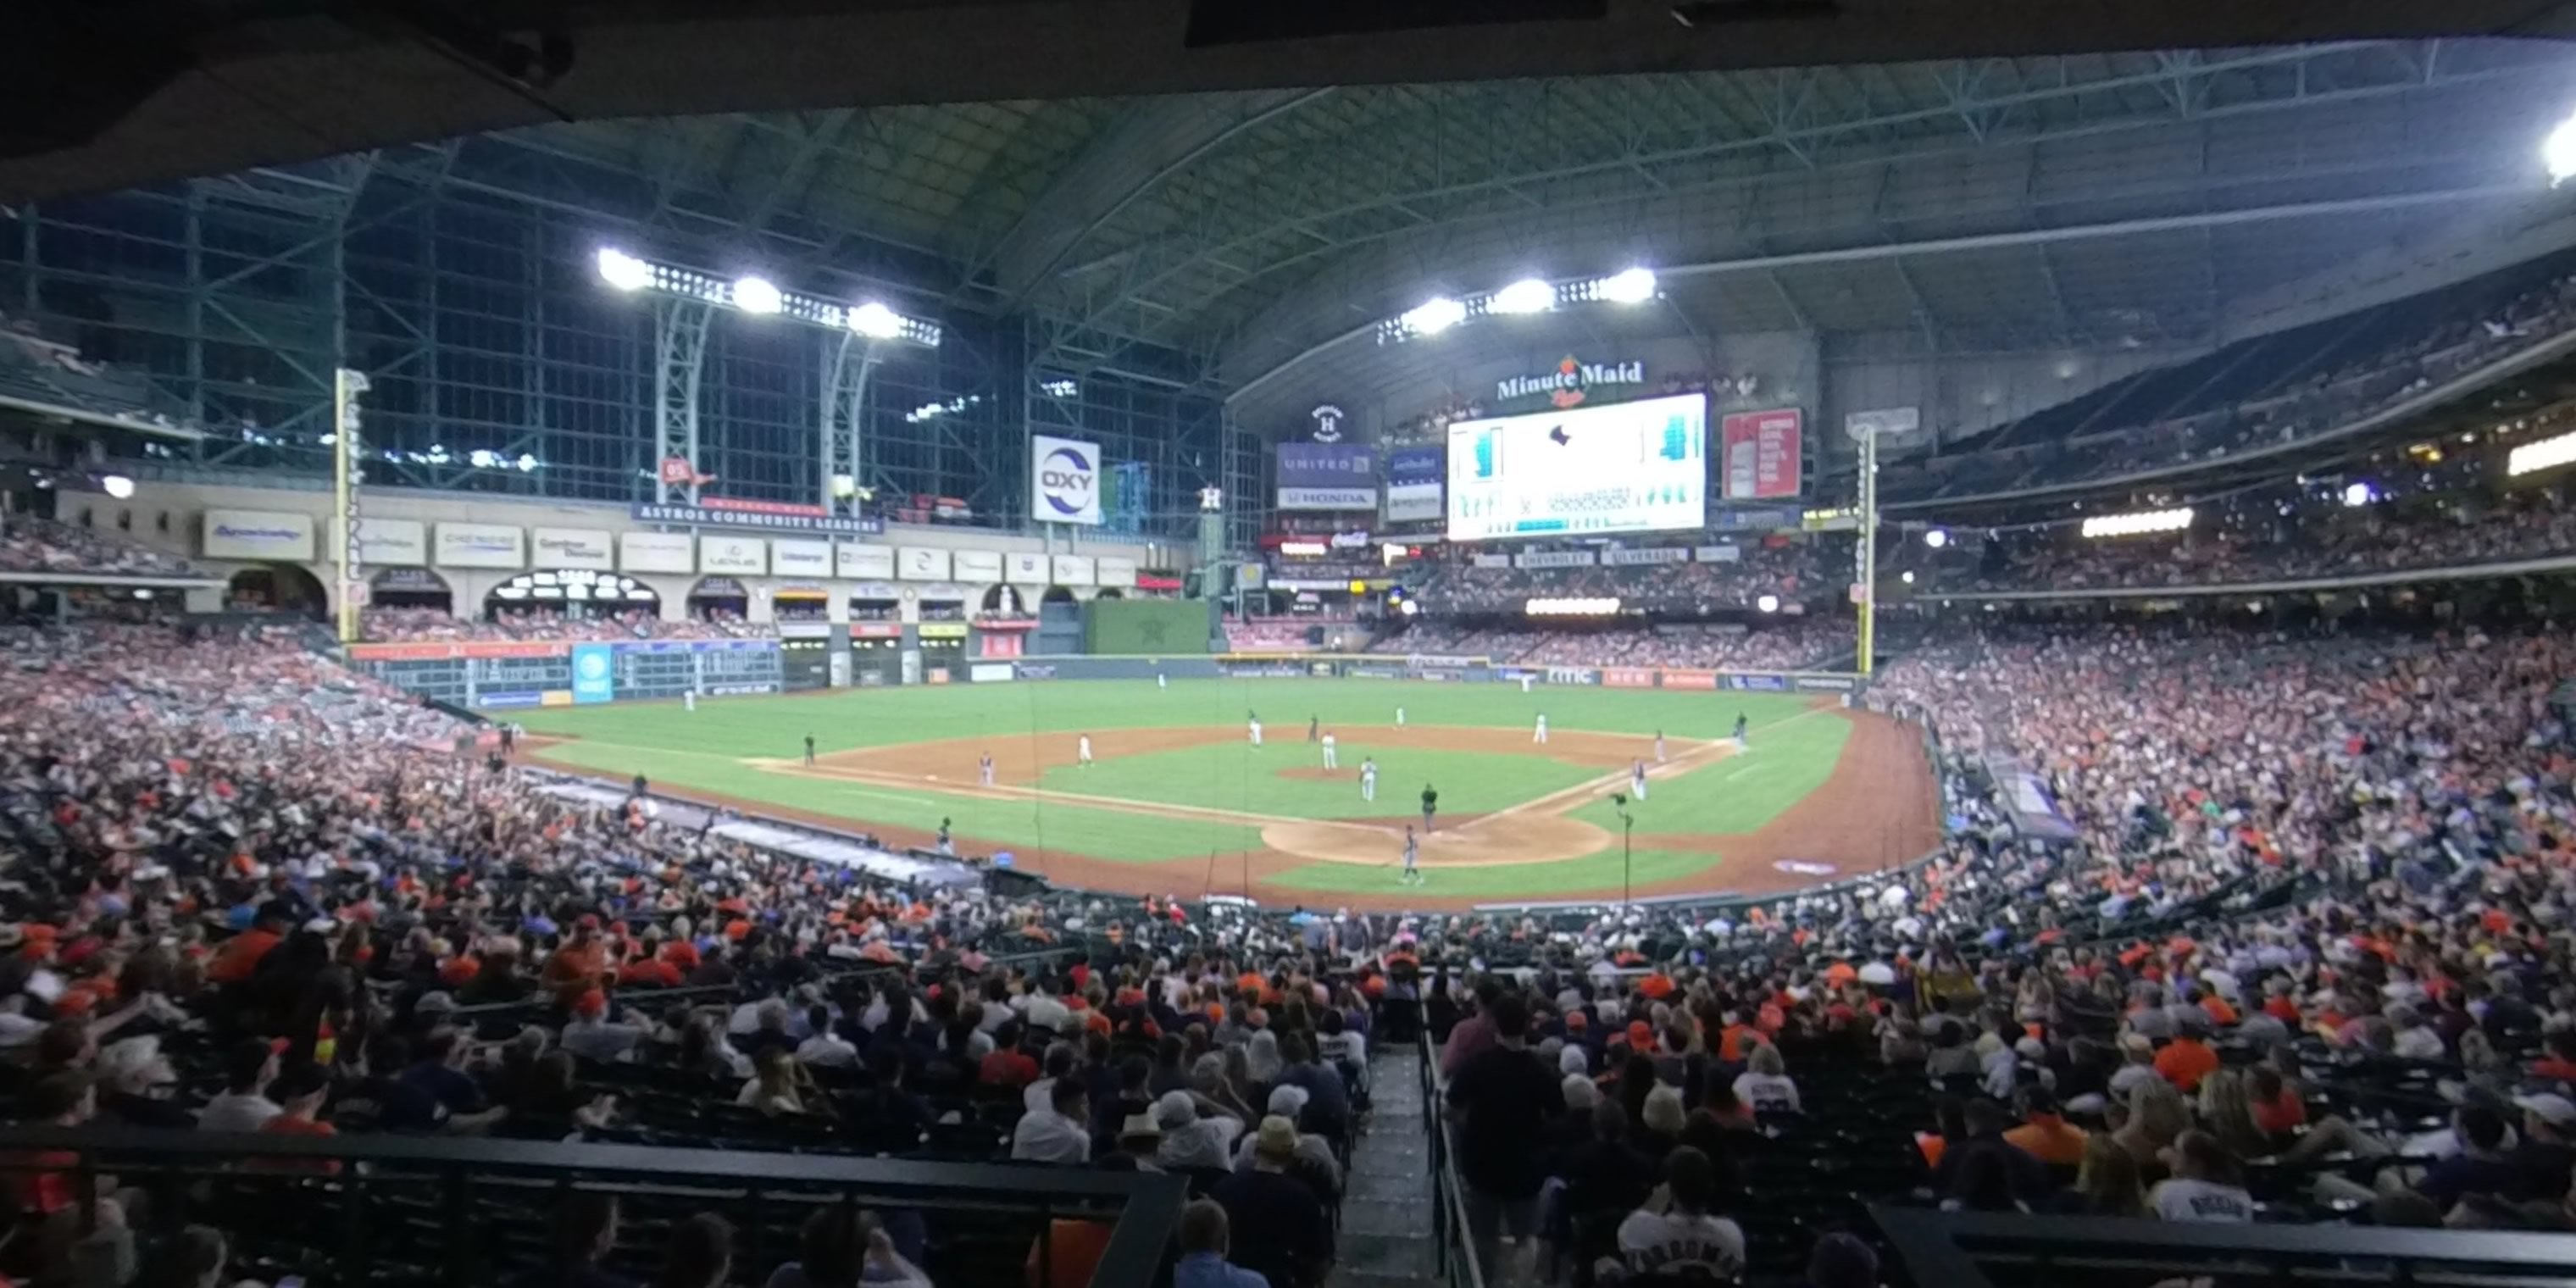 section 118 panoramic seat view  for baseball - minute maid park